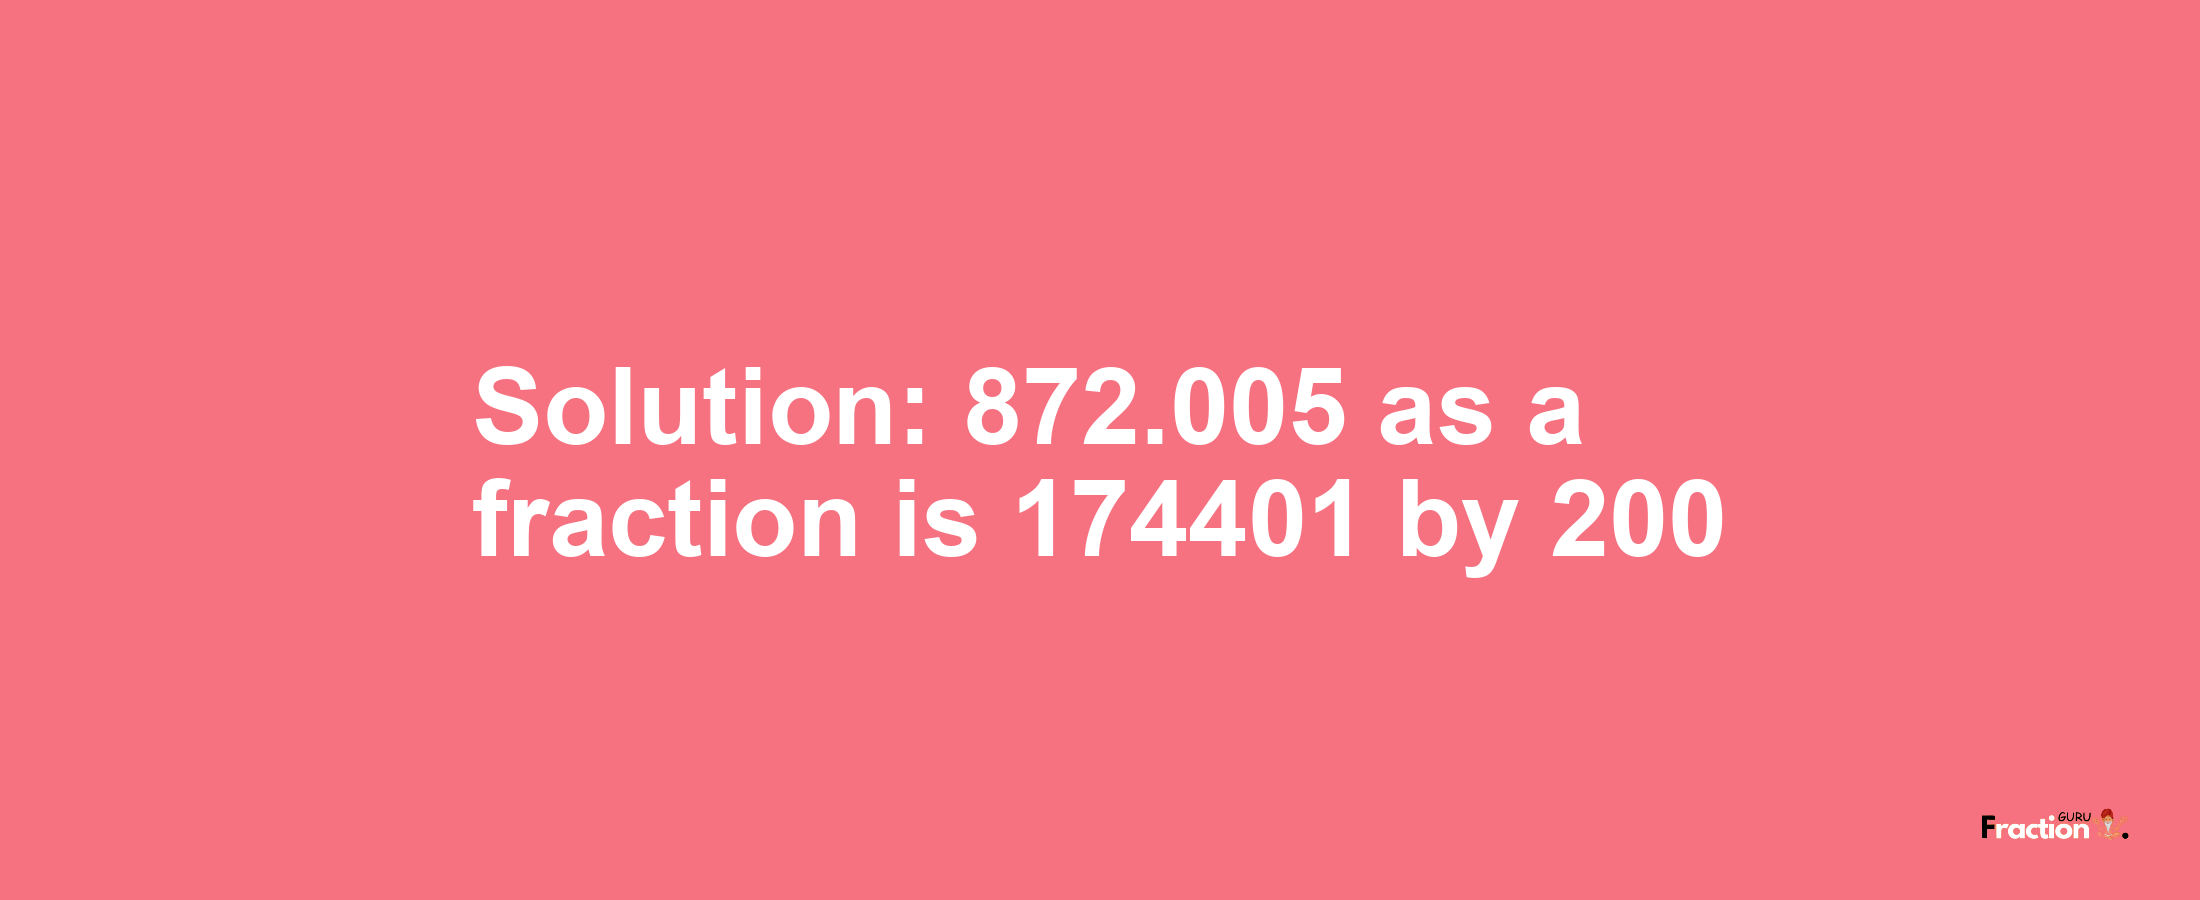 Solution:872.005 as a fraction is 174401/200